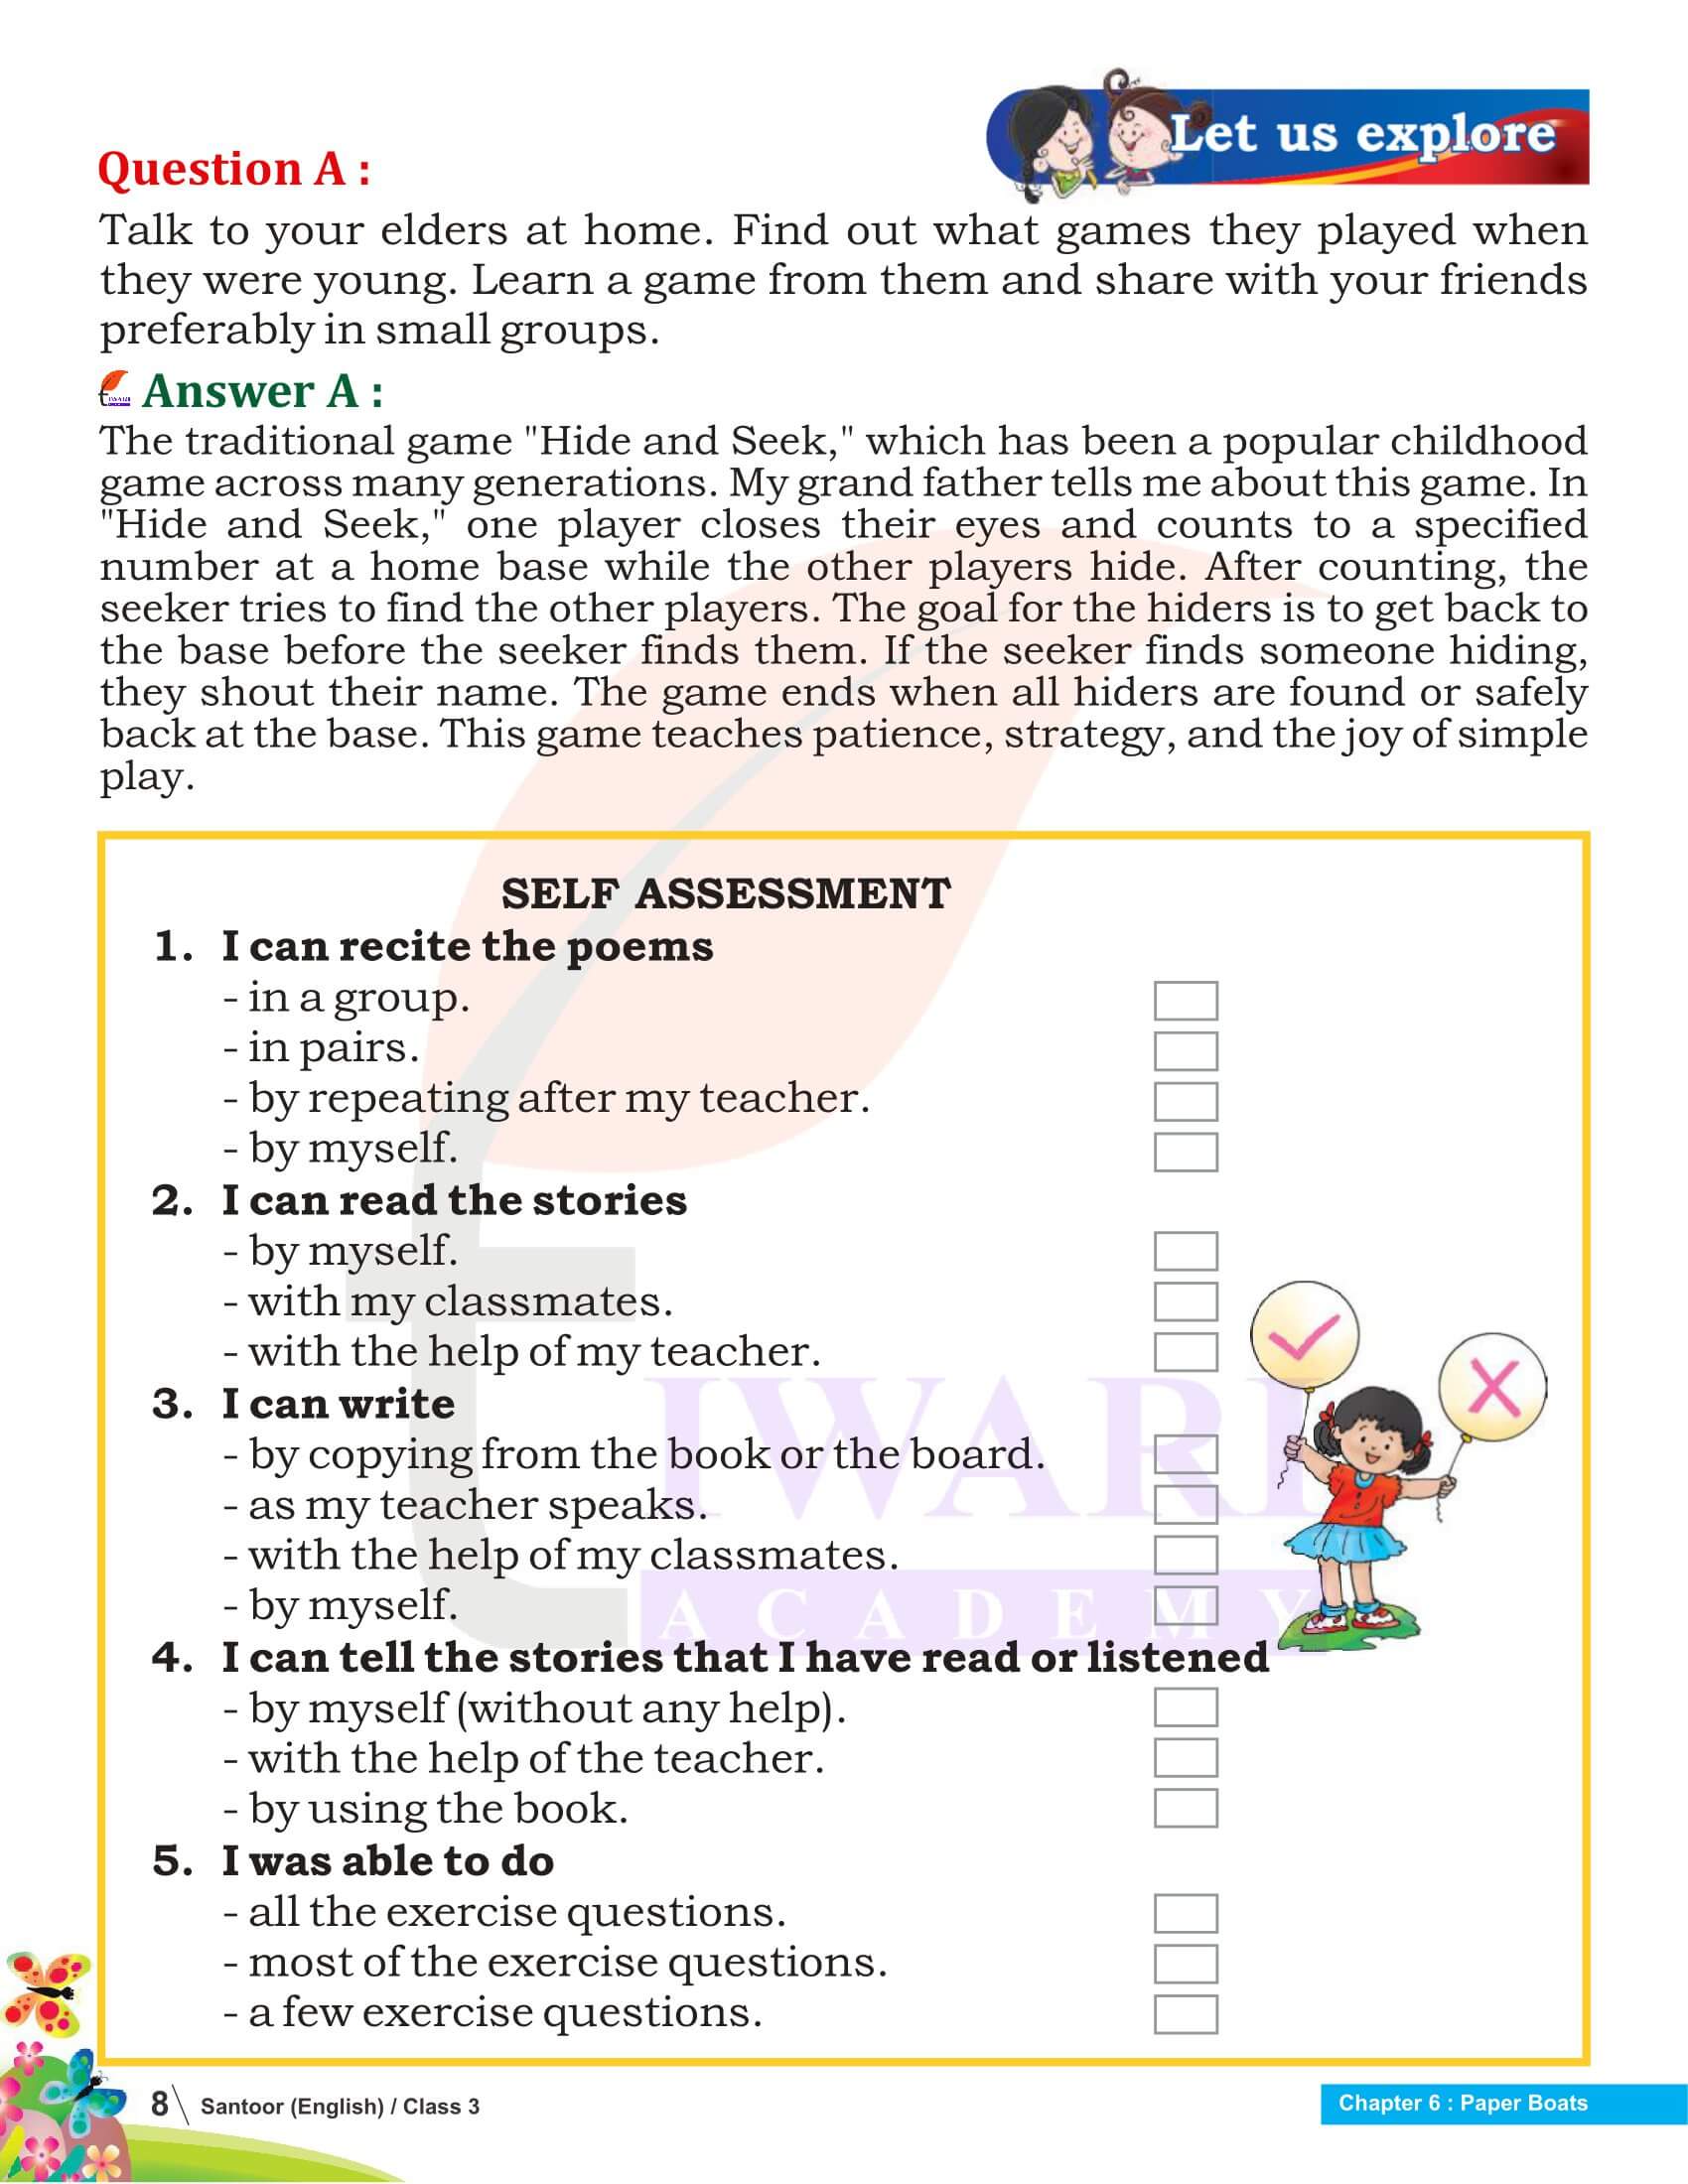 Class 3 English Santoor Chapter 6 Answers